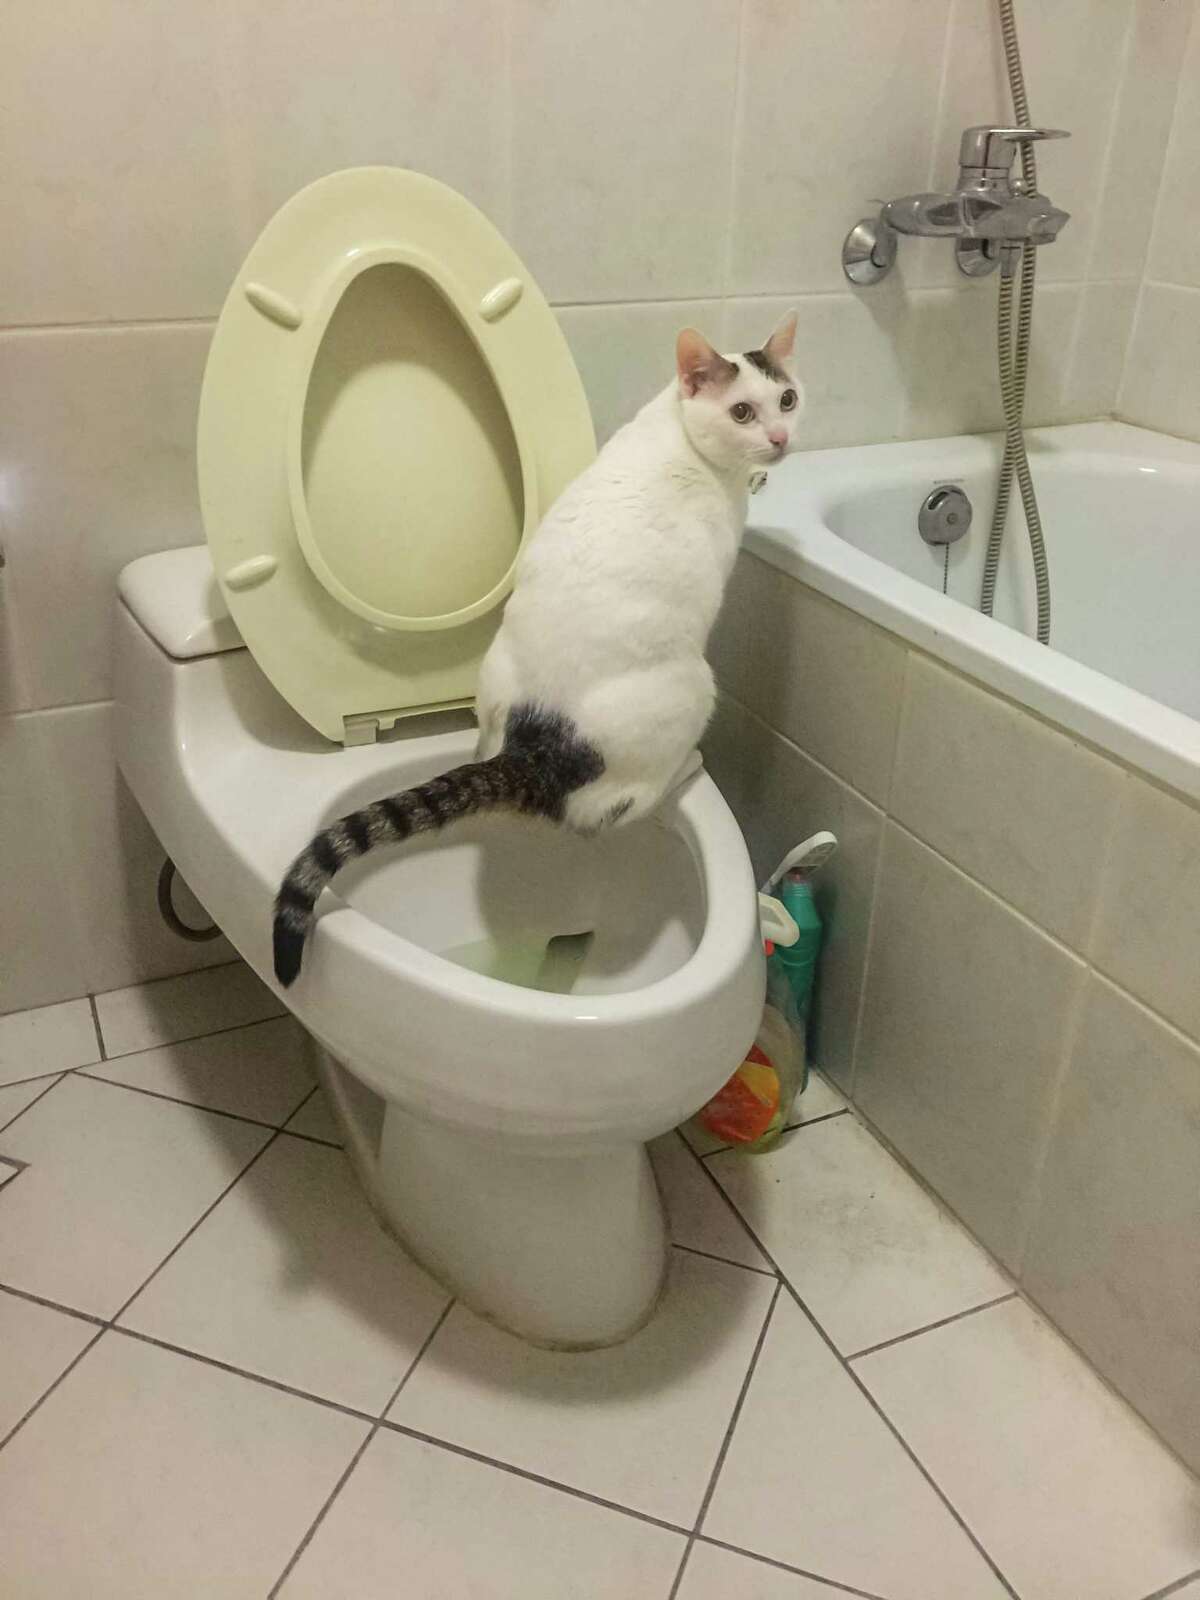 There is some anecdotal information on the Internet that suggests there are cats, who, without any training, simply start using the toilet (or tub or sink) to relieve themselves.